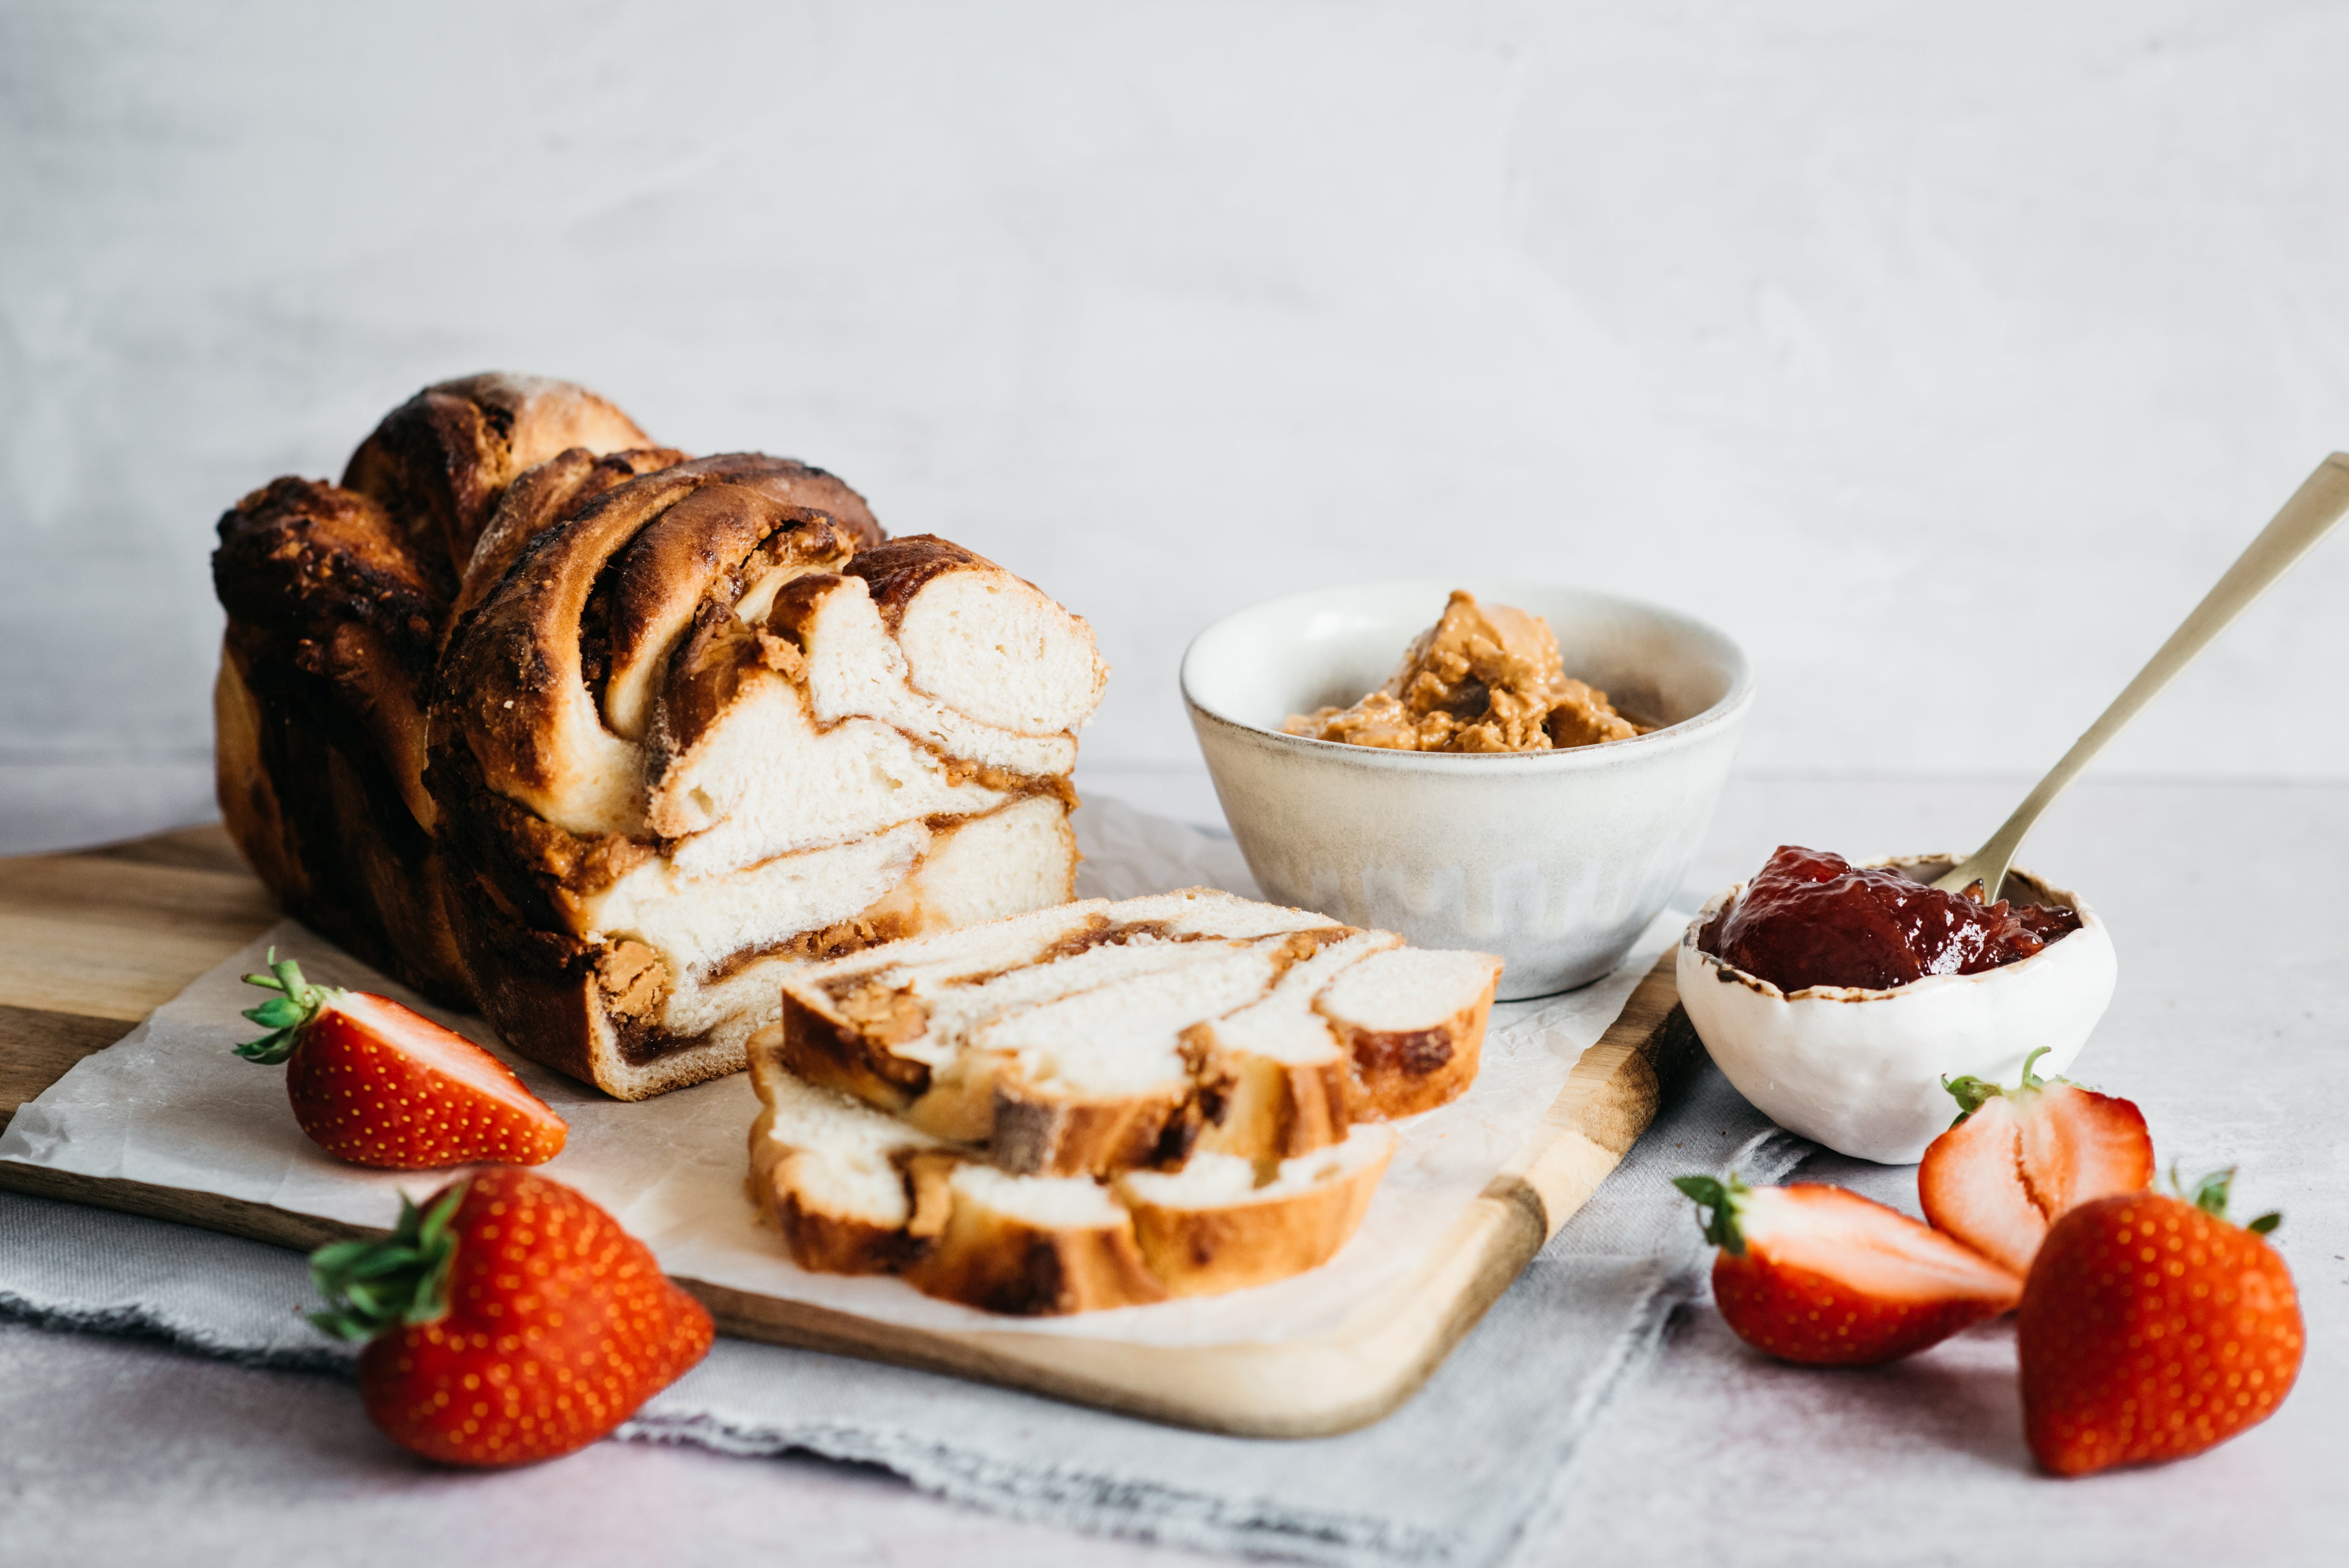 Peanut Butter Jam Babka on baking paper with chopped strawberries and choice of spreads